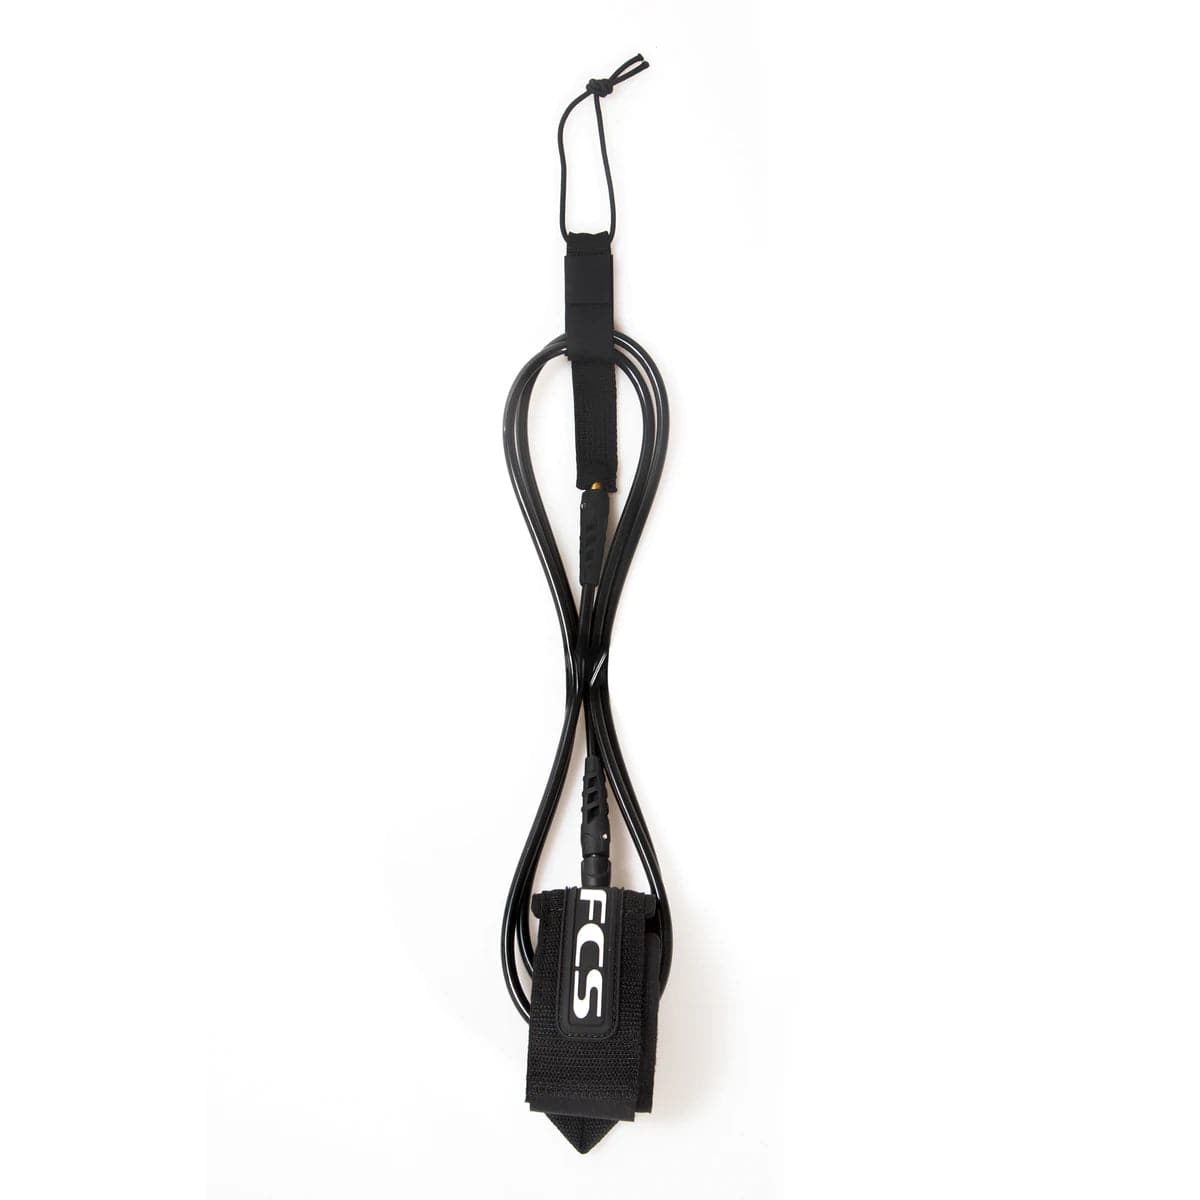 Featuring the 7' Straight Leash sup accessory, sup fin manufactured by FCS shown here from one angle.